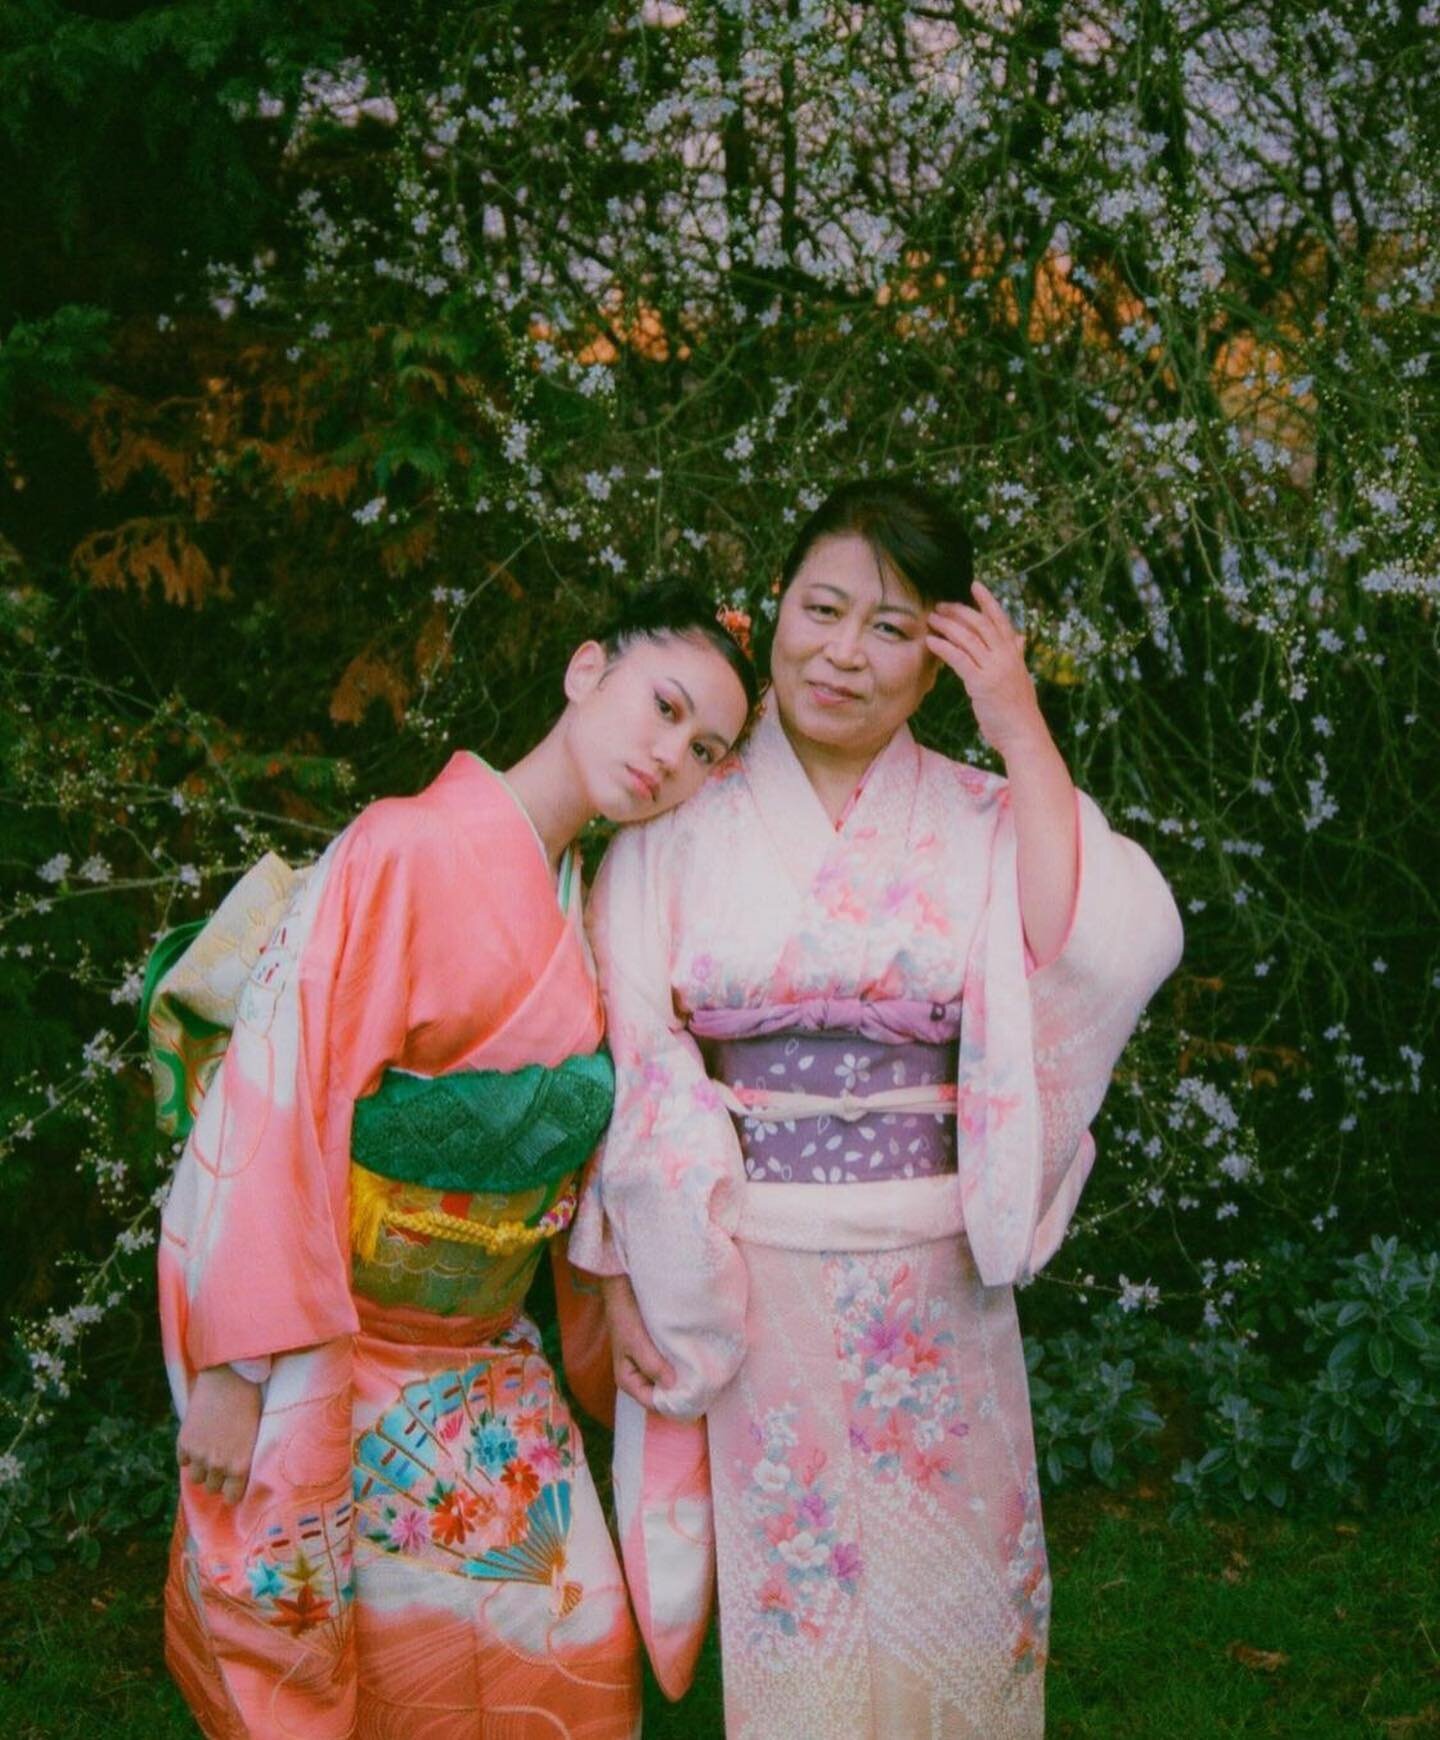 mother and daughter 🍥🐚🌸 by @xinrunhee 💐

#ashamedmagazine